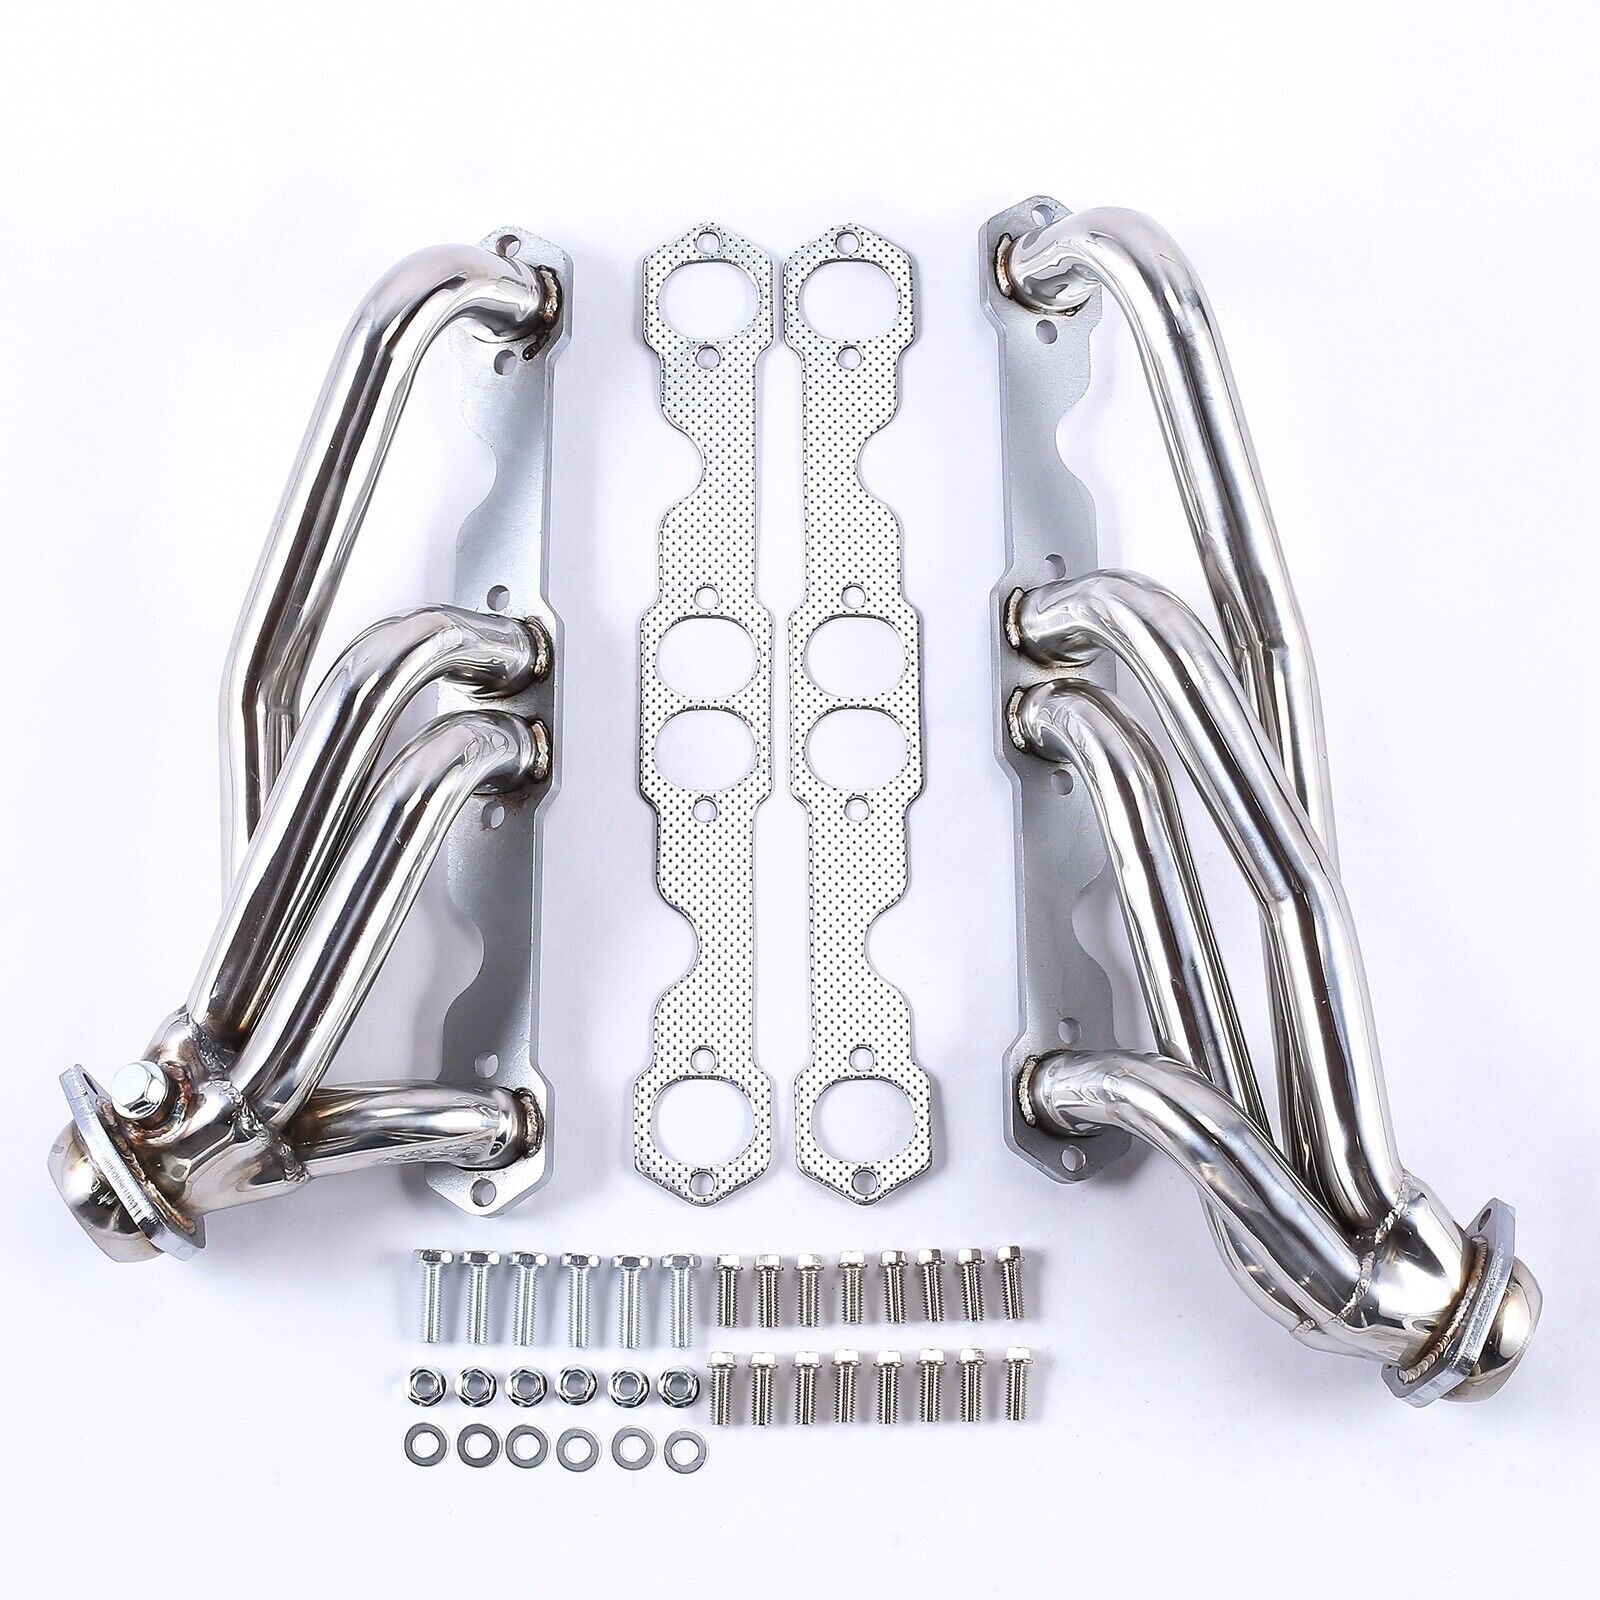 Fit Chevy GMC 88-97 5.0L/5.7L 305 350 V8 Stainless Steel Exhaust Headers Truck